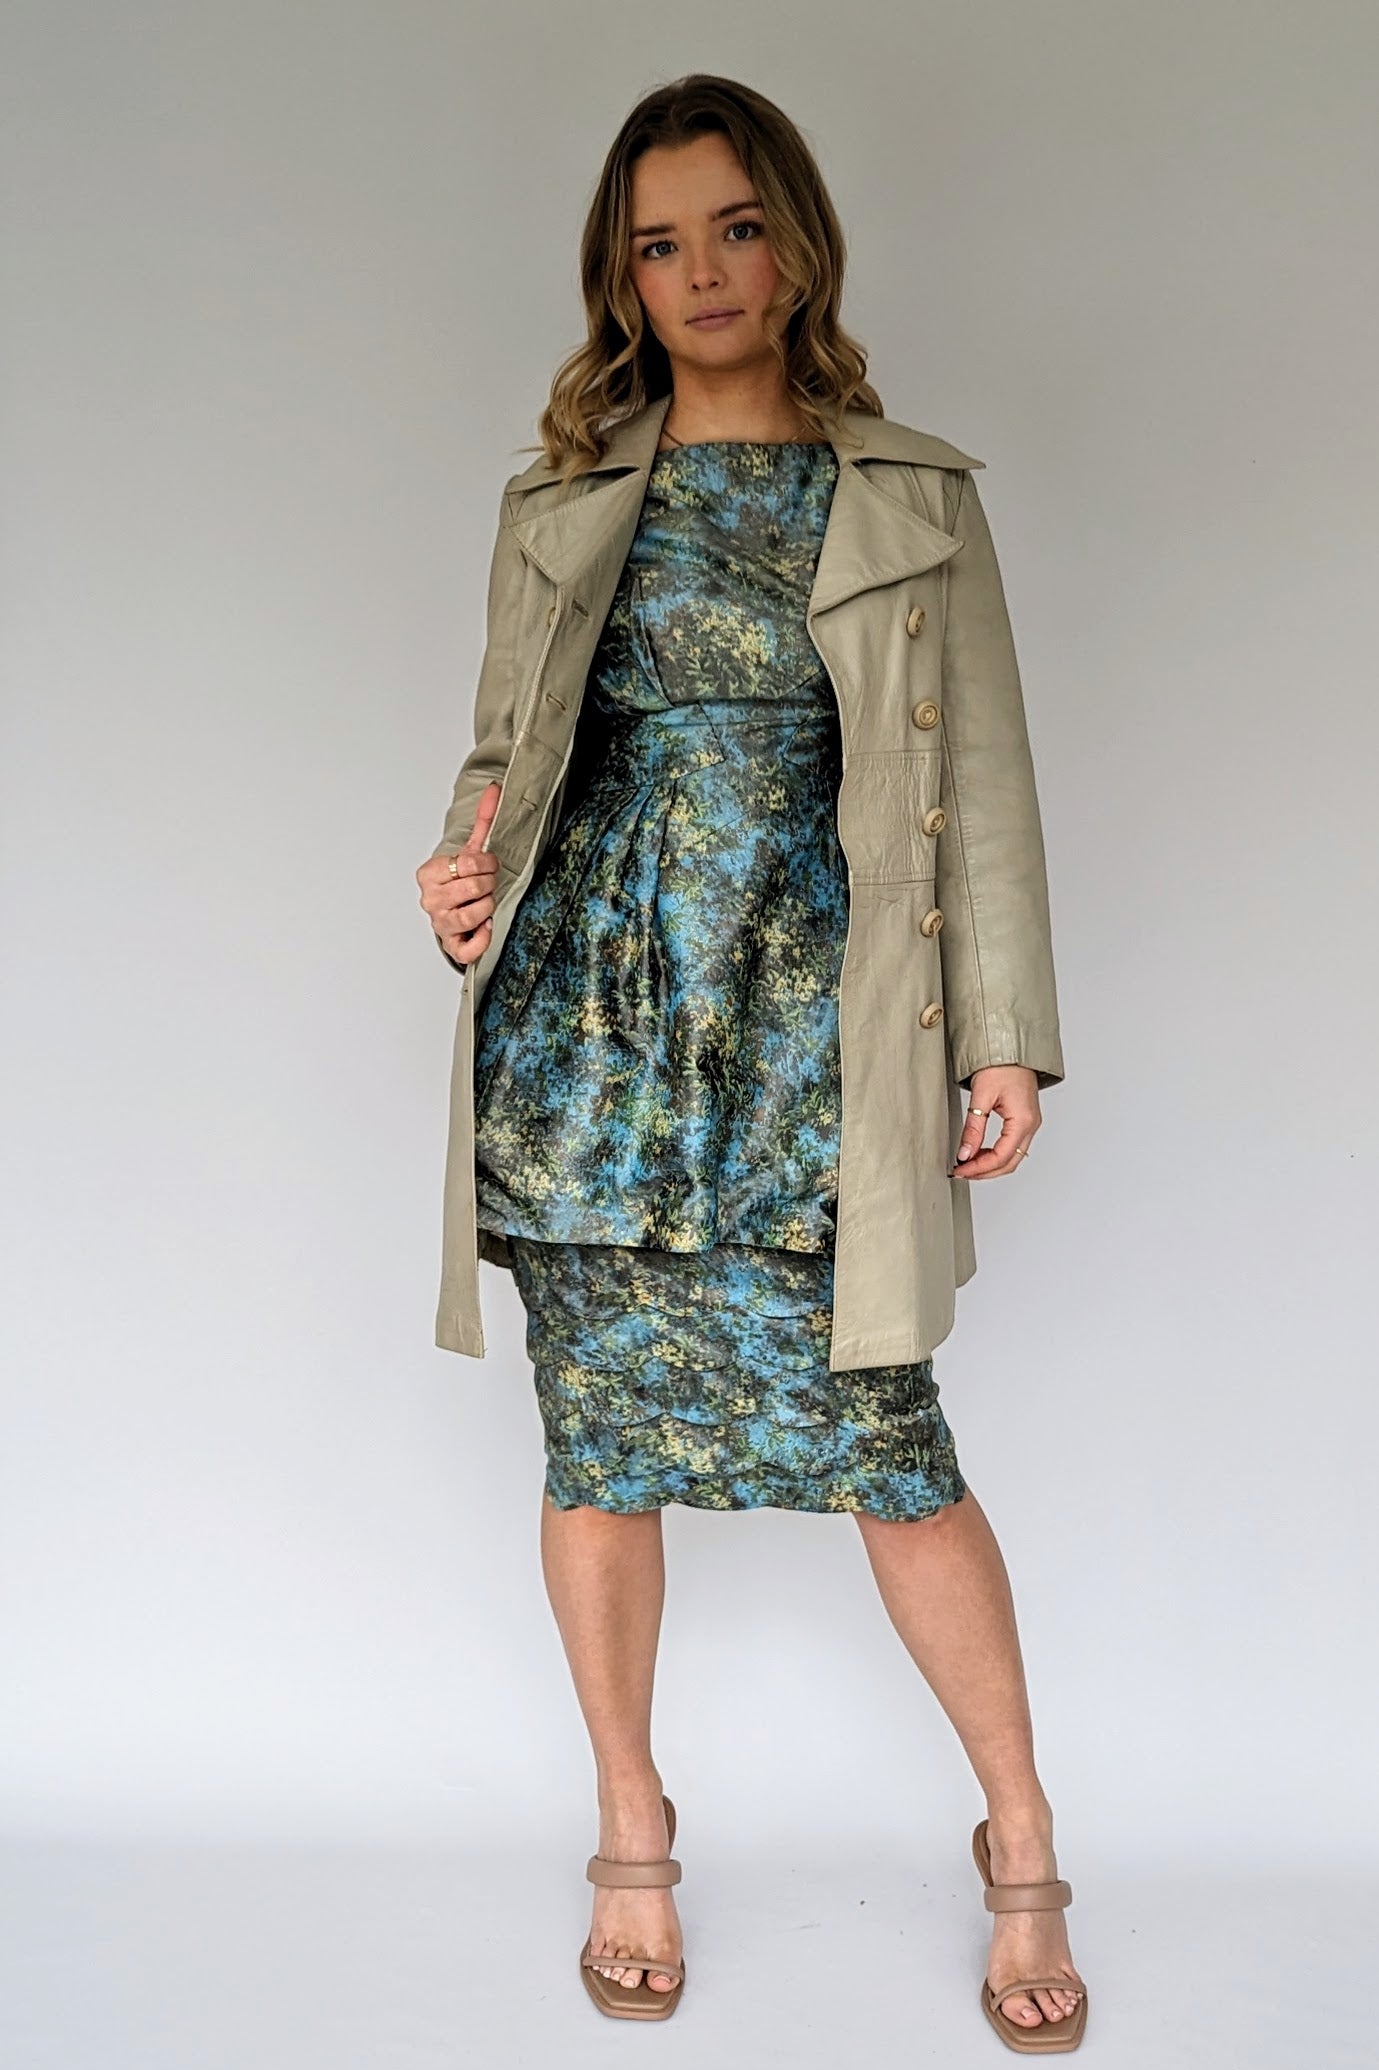 two piece turquoise and gold top and skirt vintage suit with grey mod leather coat